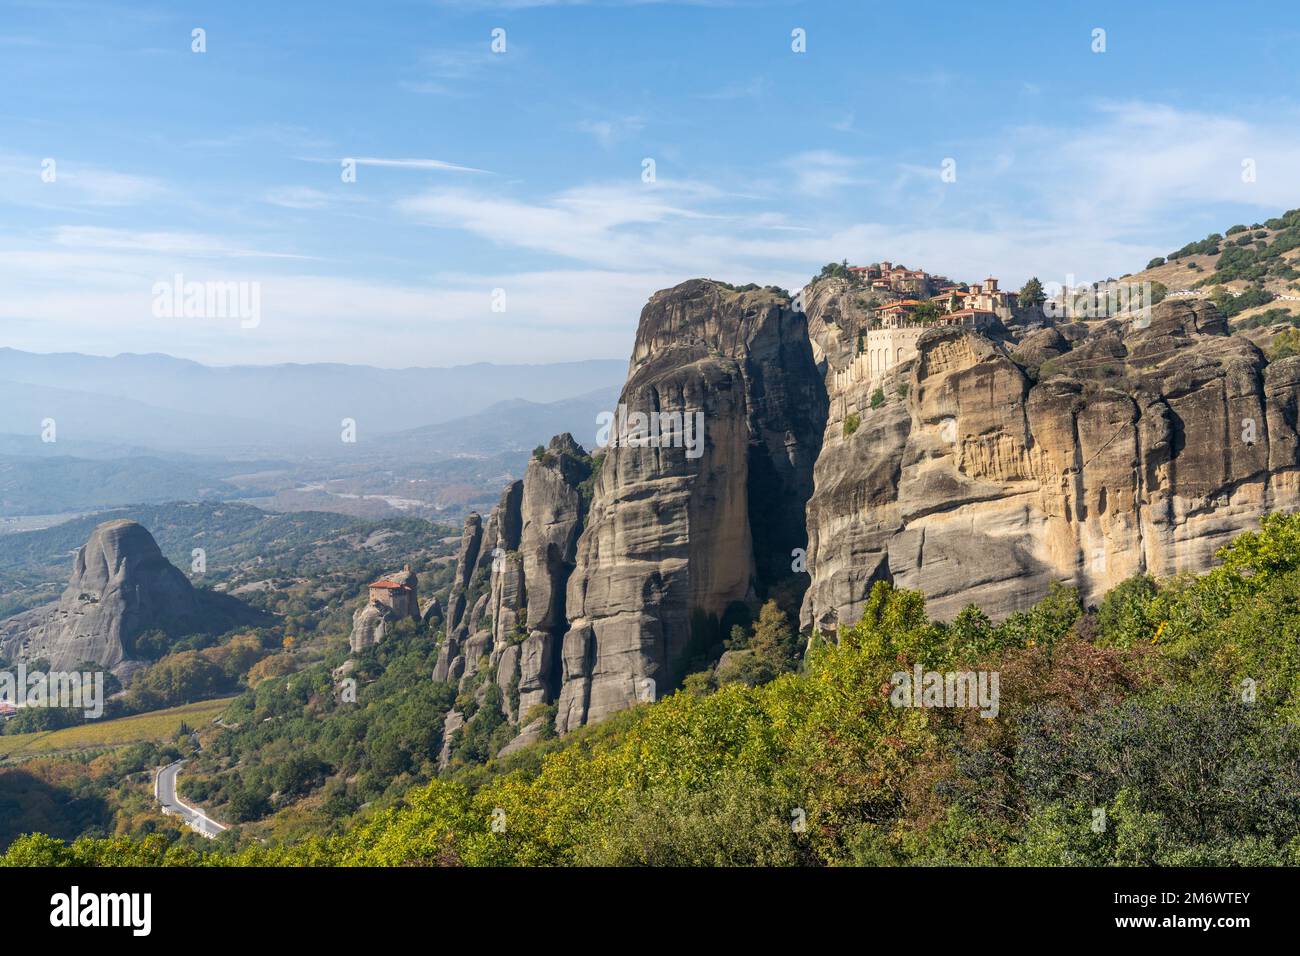 A landscape of the Meteora rock formations with the famous monasteries on the hilltops Stock Photo